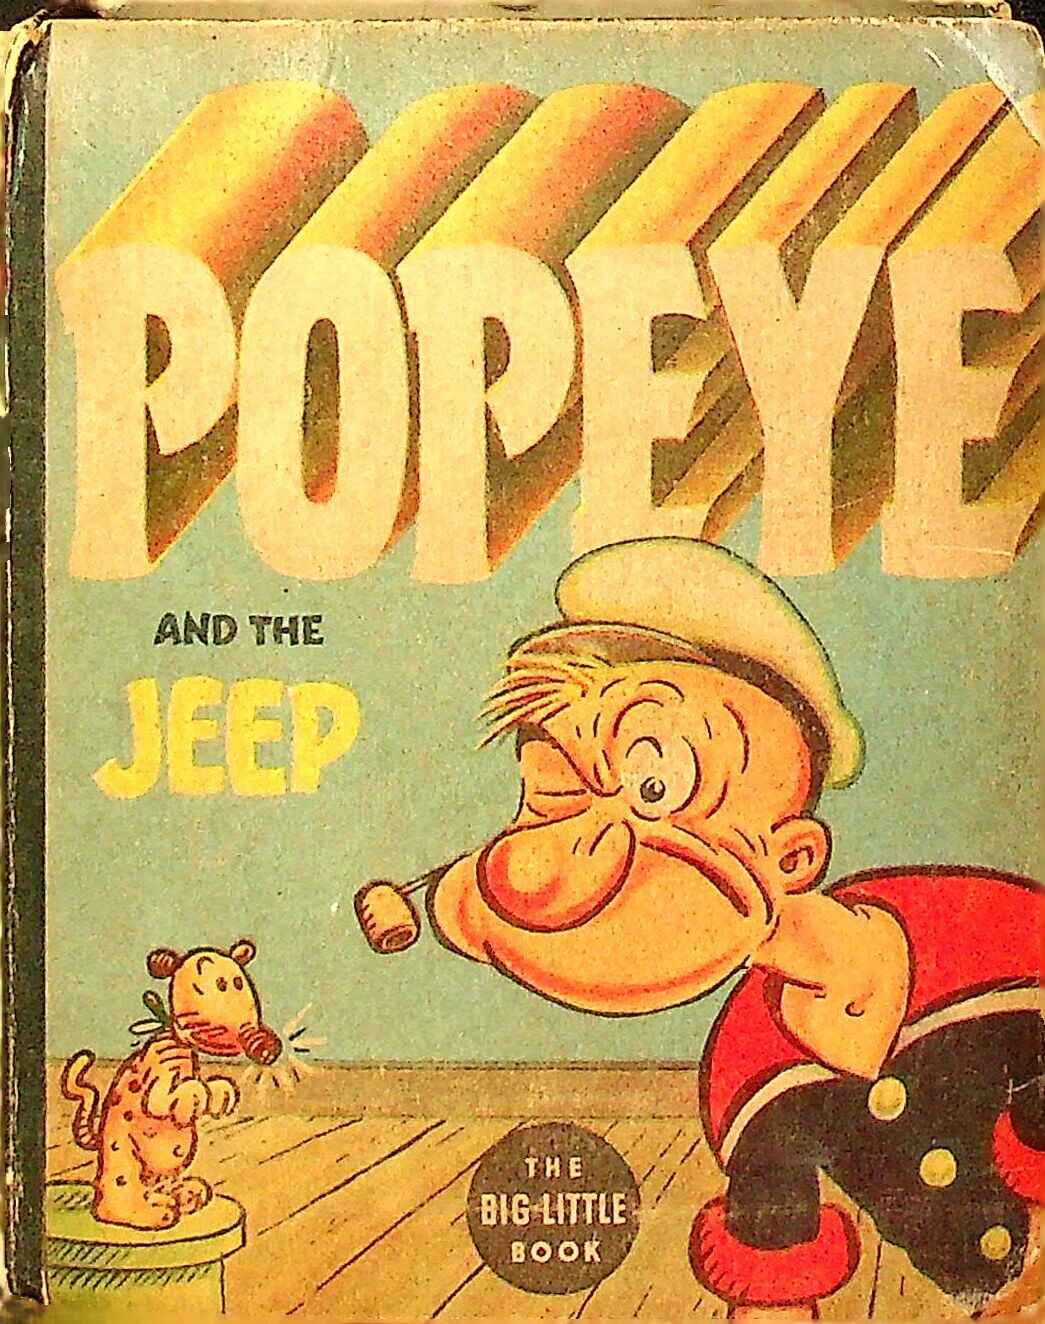 Popeye and the Jeep #1405 VG 1937